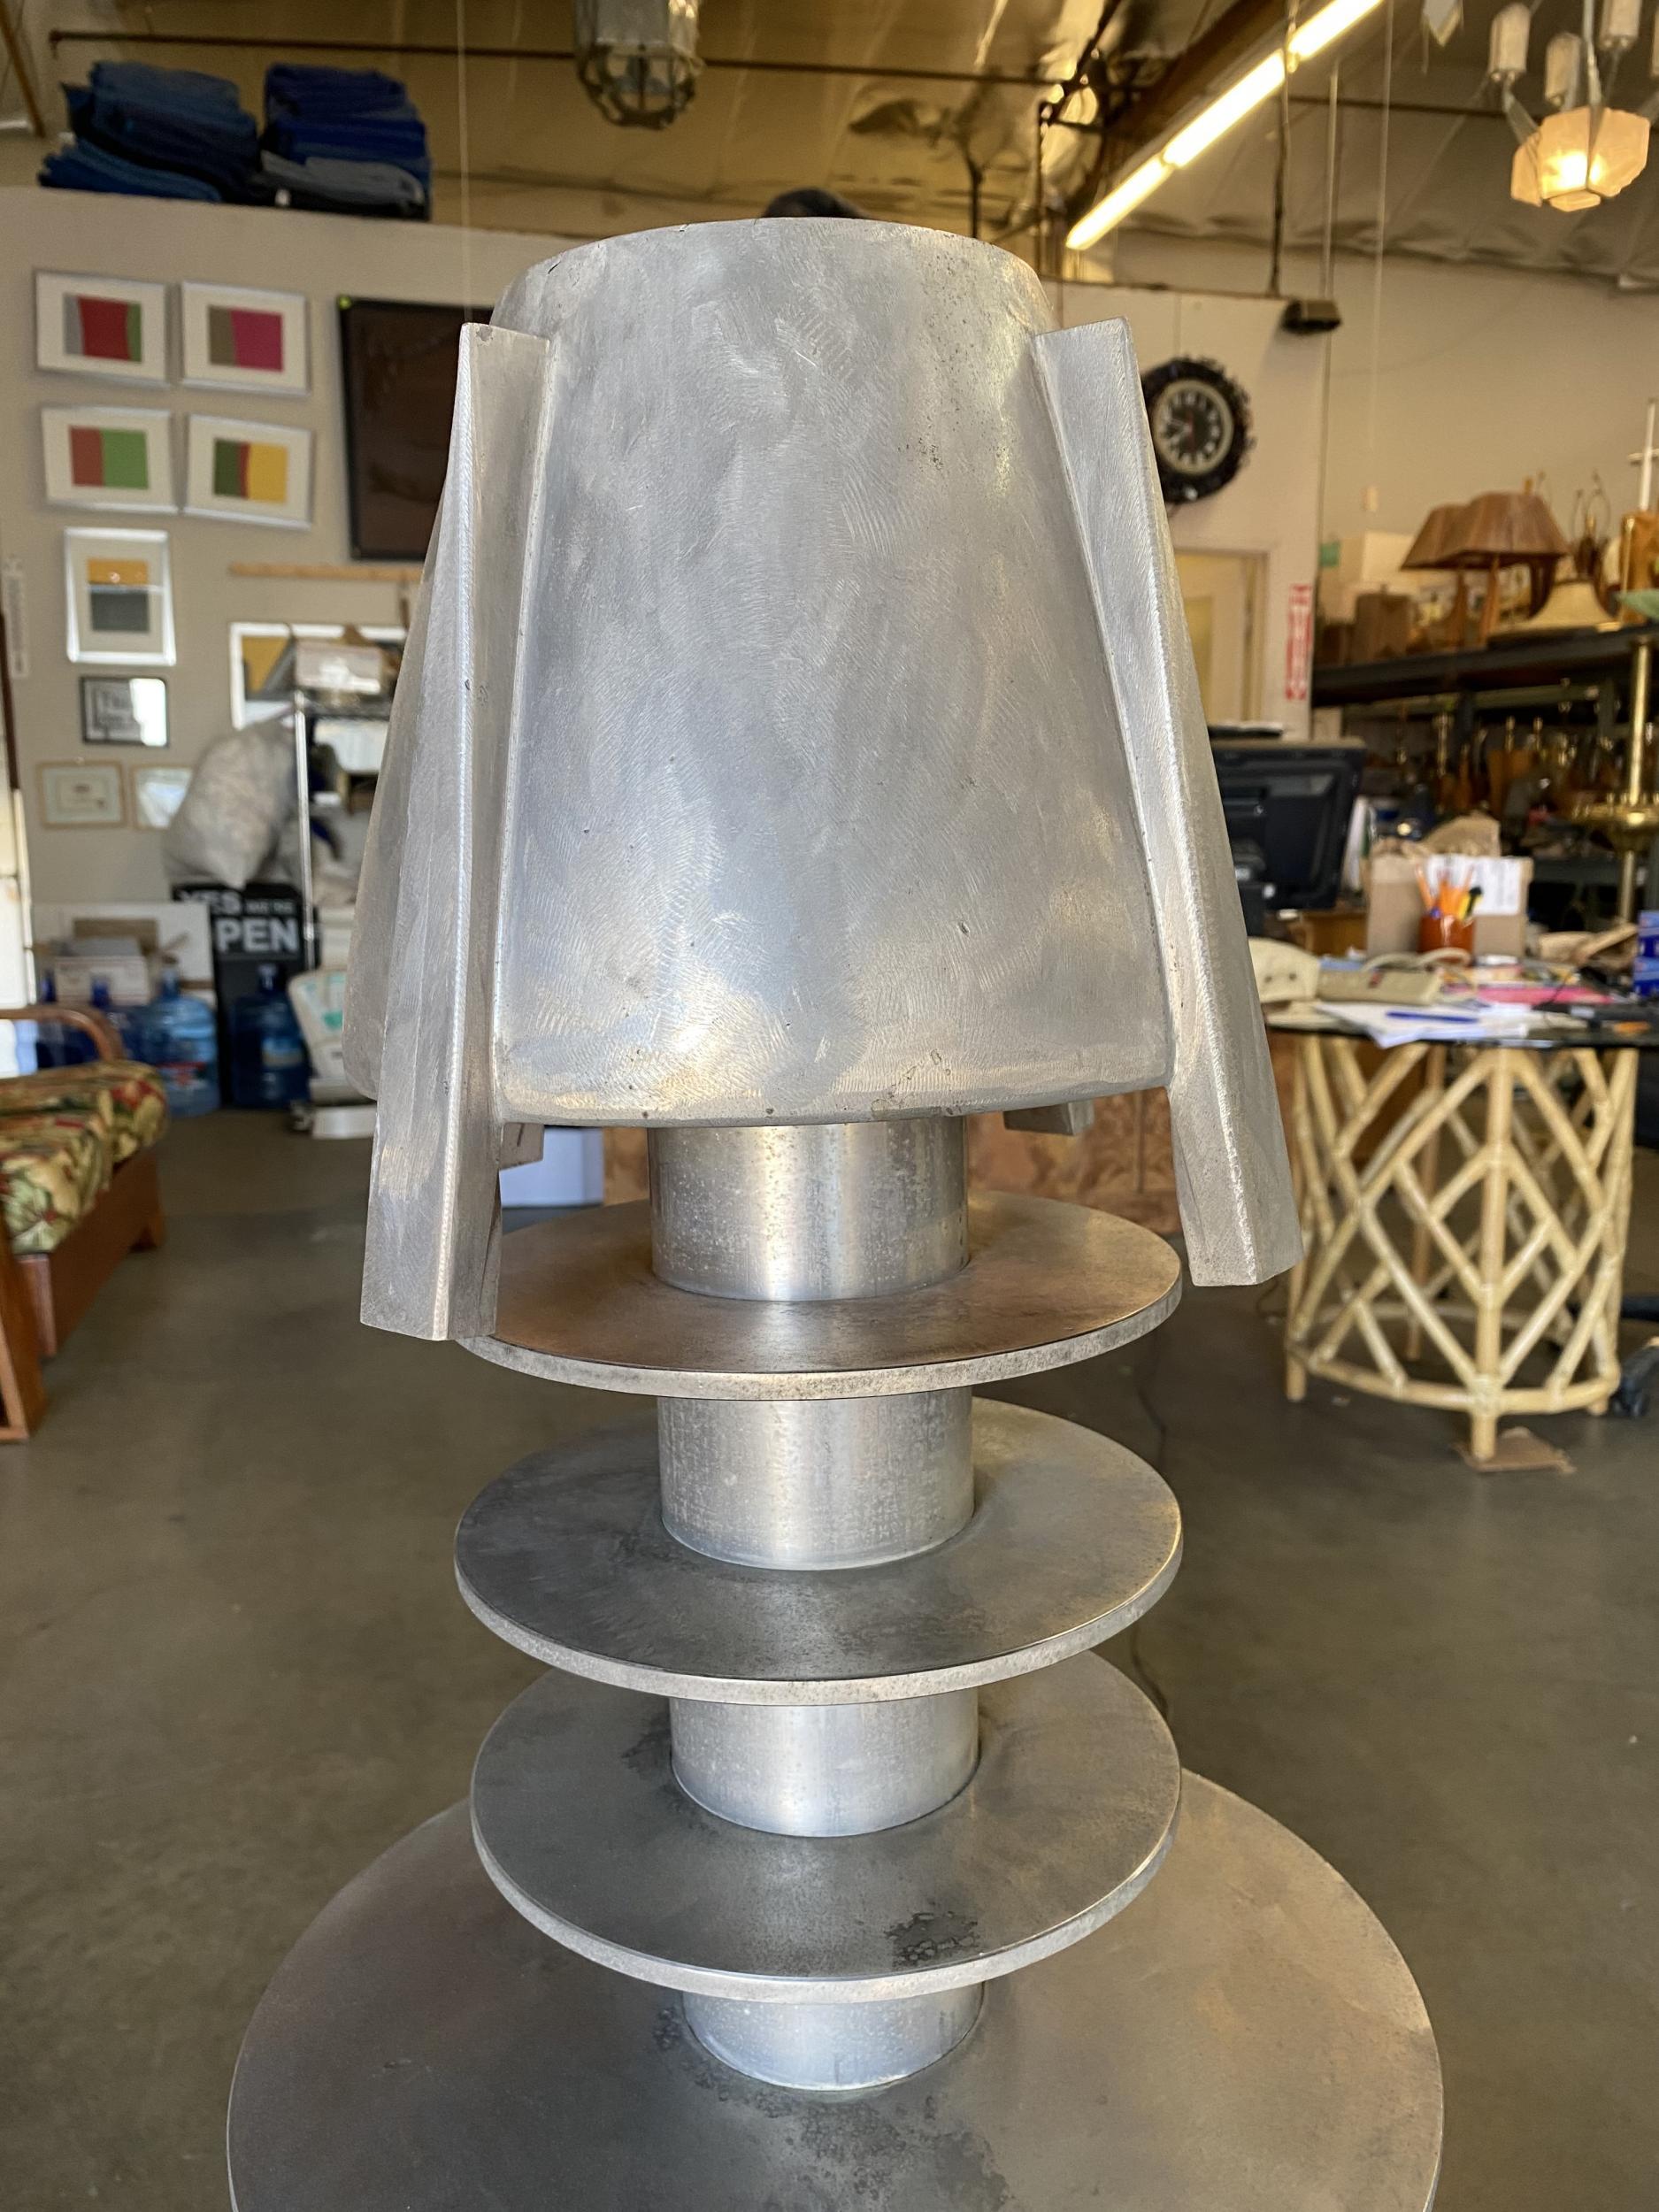 Custom Made Aircraft Aluminum Airplane Turbine Blinker Lamp In Excellent Condition For Sale In Van Nuys, CA